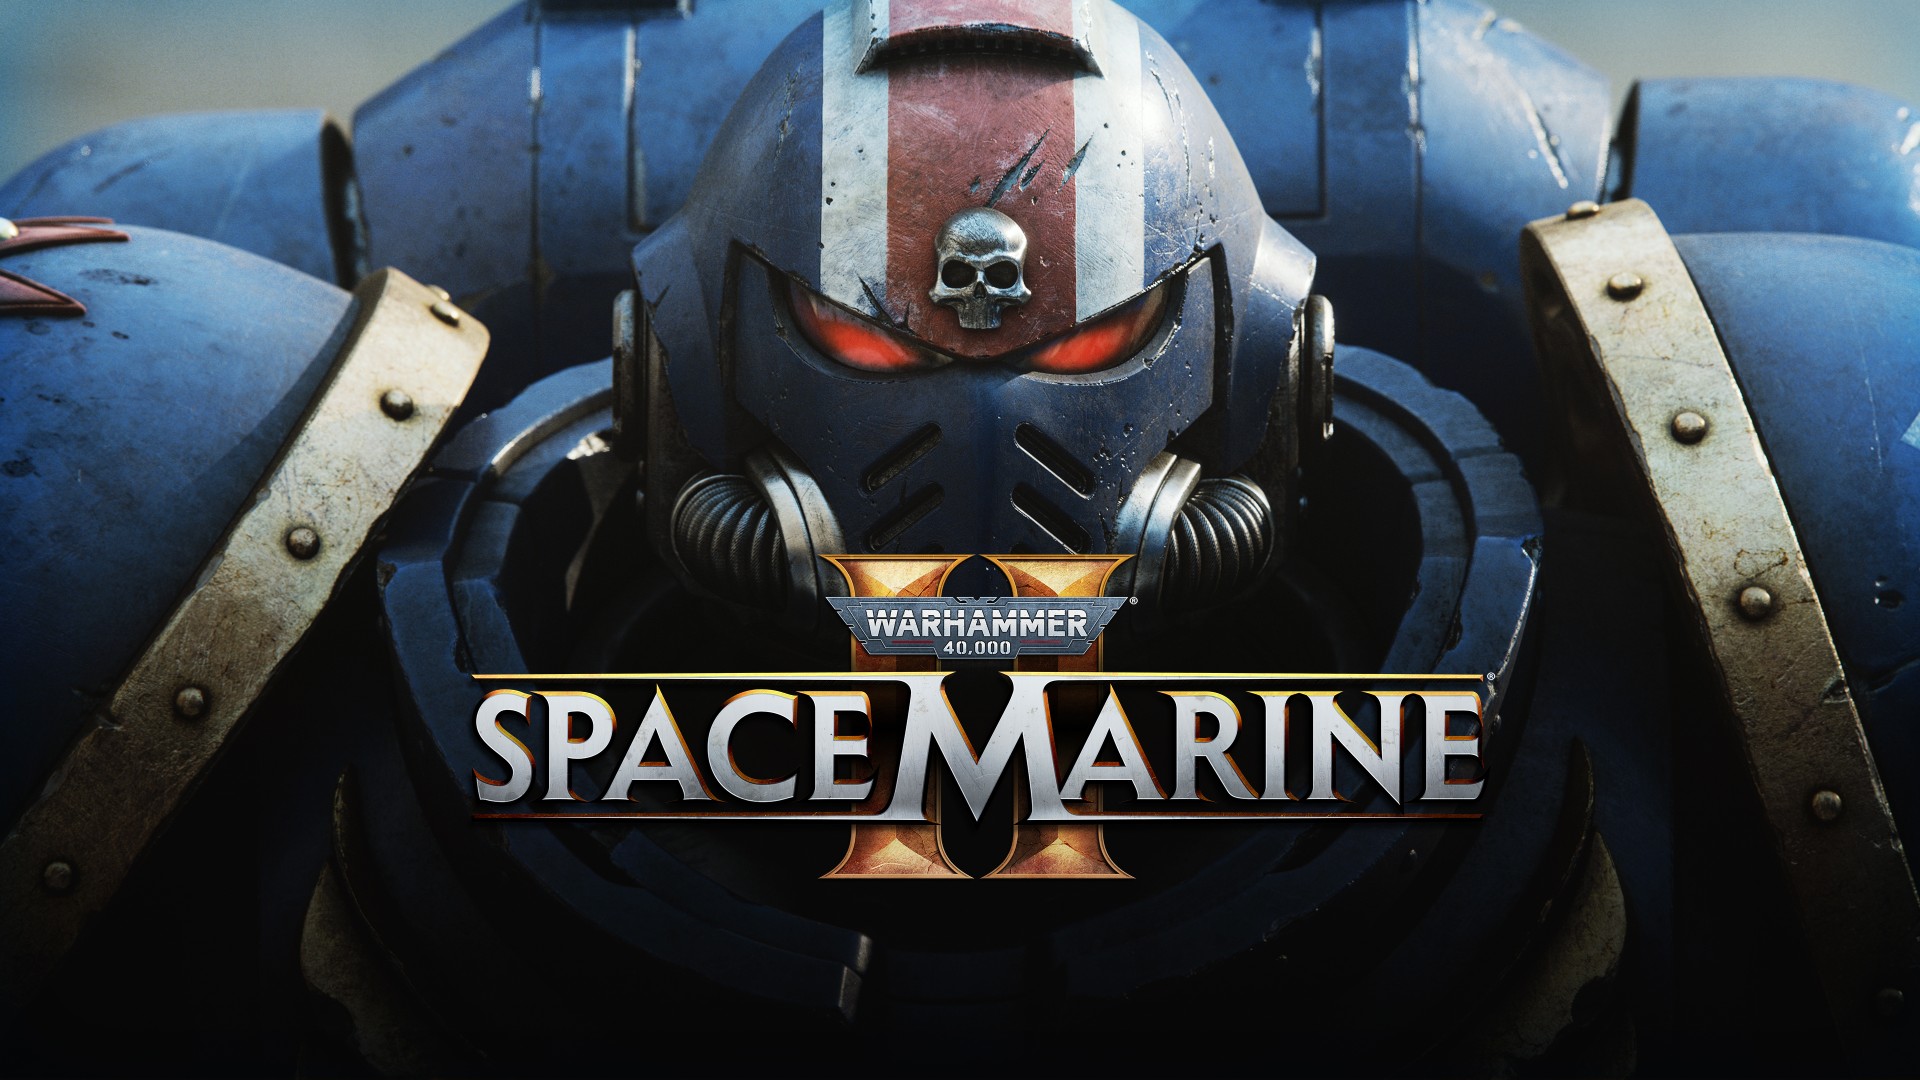 Warhammer 40,000: Space Marine 2 Revealed with an Epic Trailer - Xbox Wire